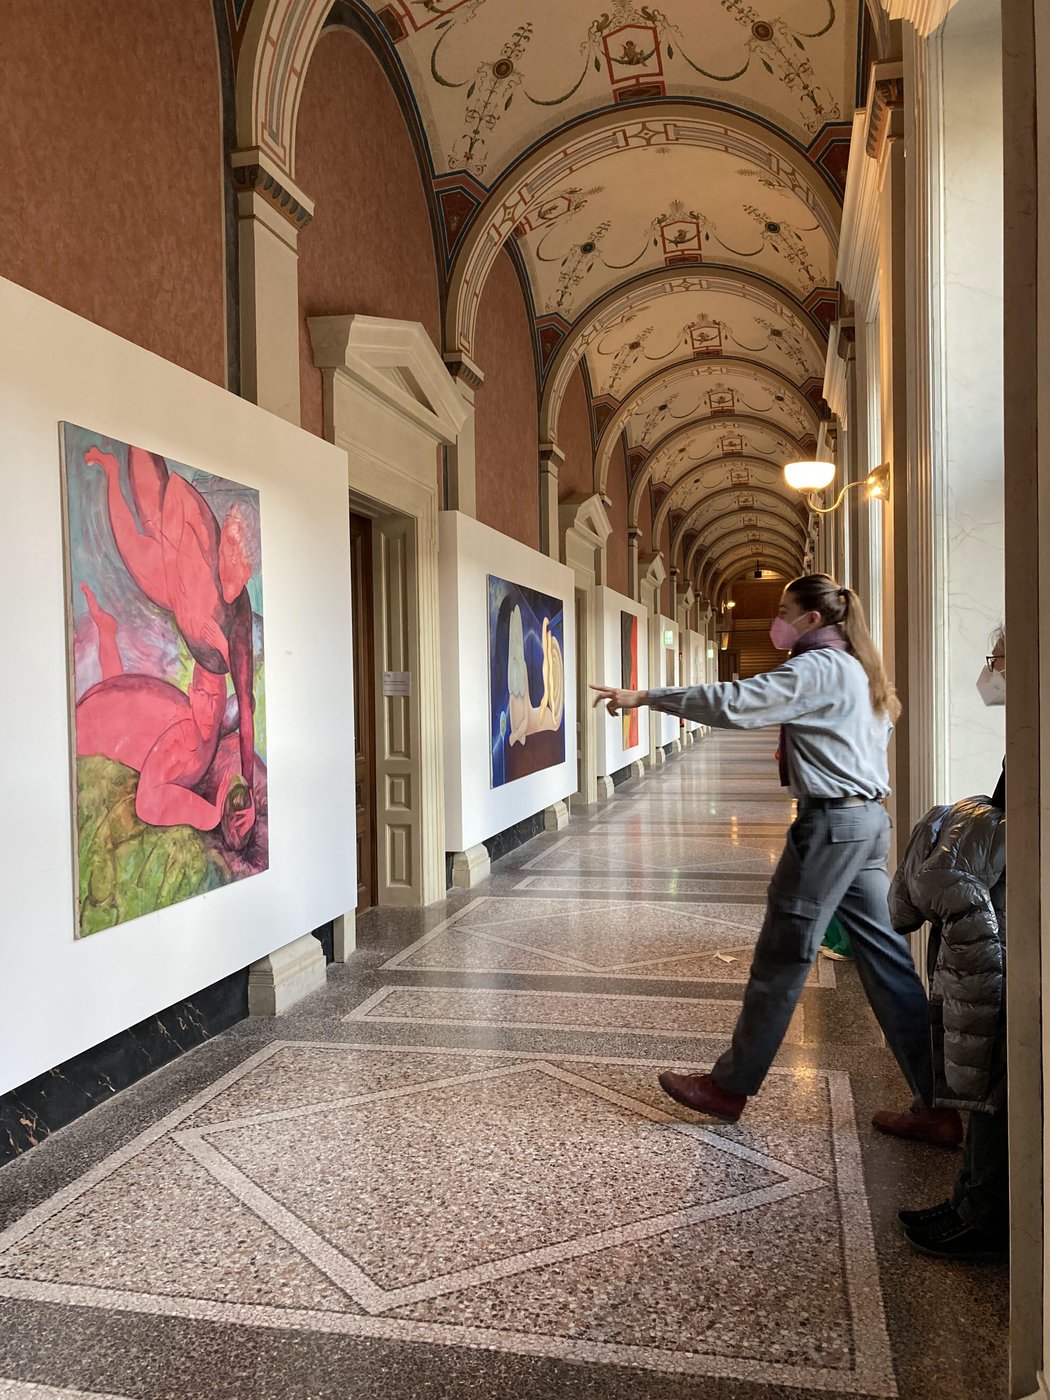 First floor, Schillerplatz 3.  In the corridor, the students' paintings of the class for figurative paintings are on display. Clemens Grömmer points with his hand to a painting by Alberto Cappai. Also visible is a work by Arang Choi.